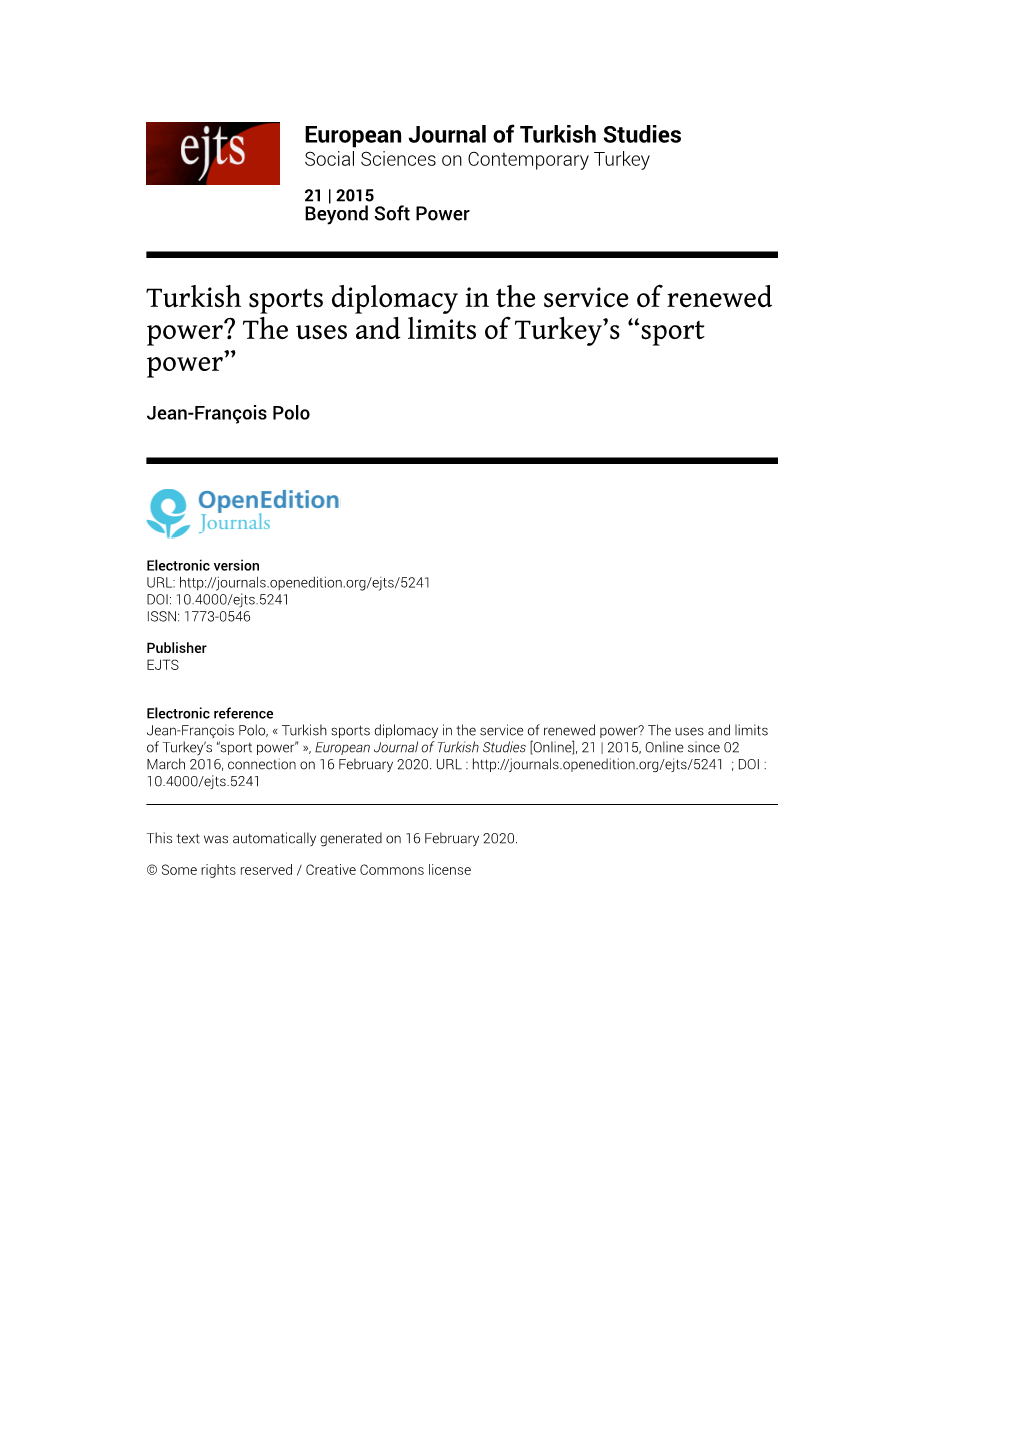 European Journal of Turkish Studies, 21 | 2015 Turkish Sports Diplomacy in the Service of Renewed Power? the Uses and Limits